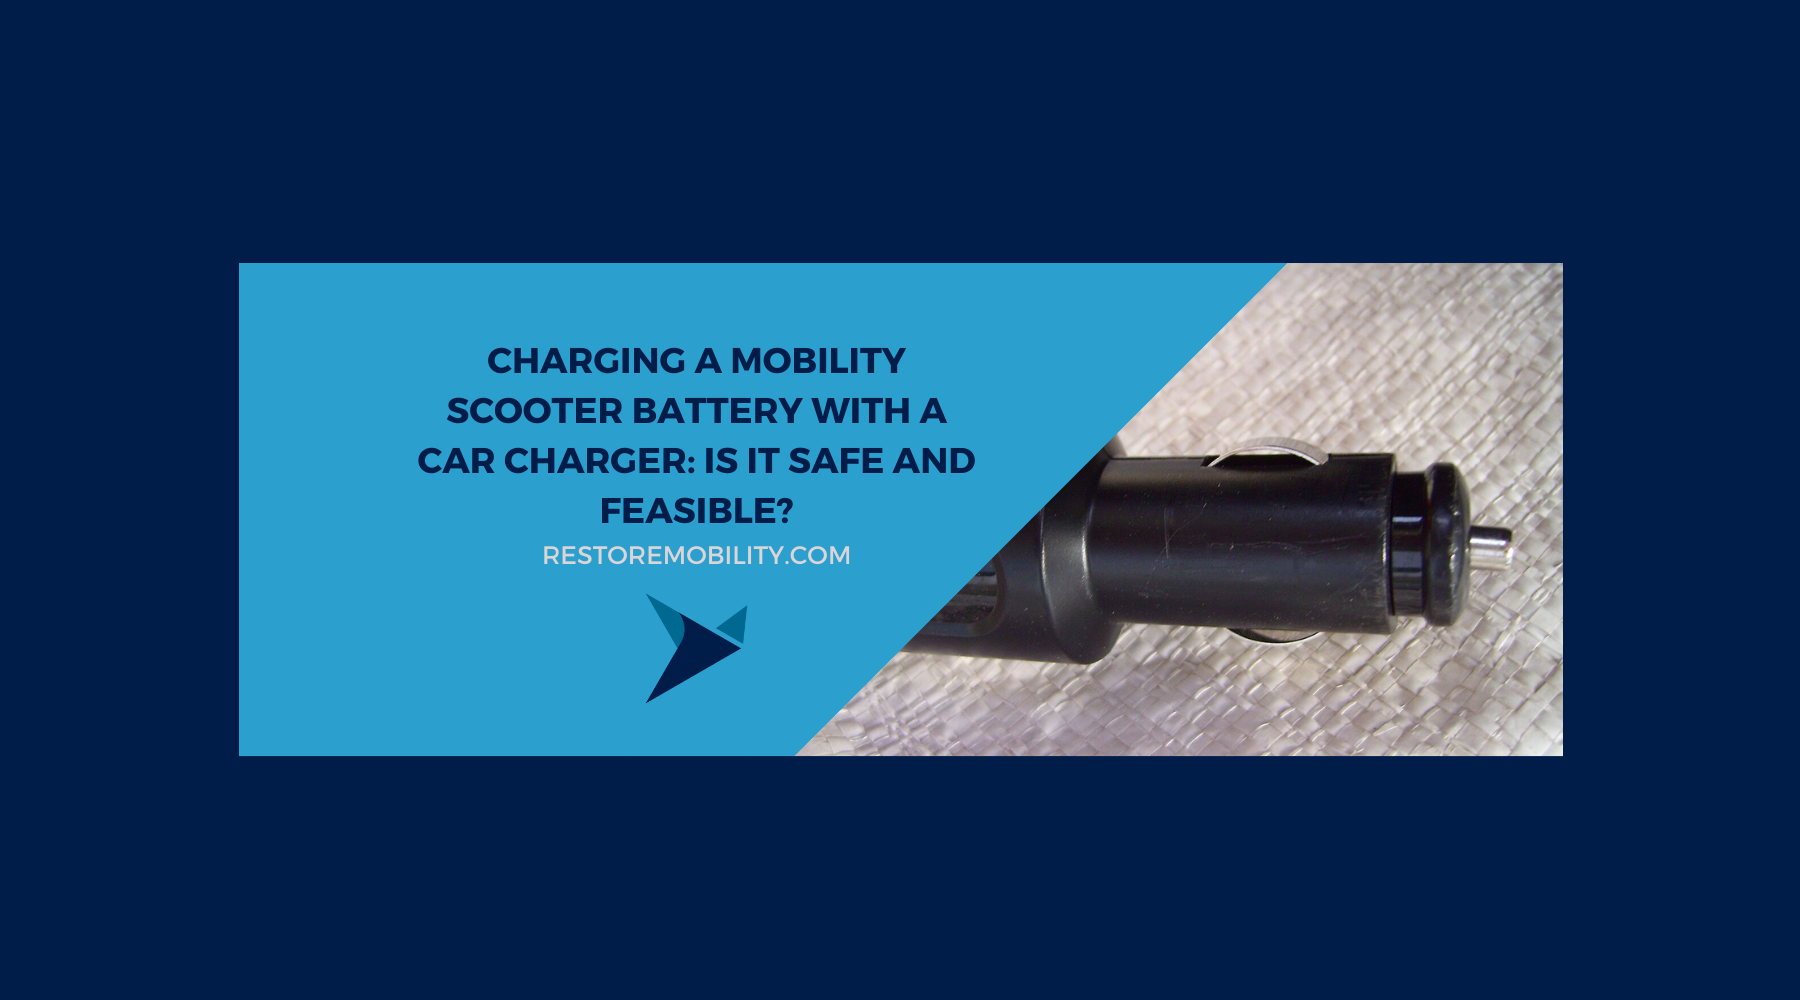 Charging Mobility Scooter Batteries with a Car Charger: Is It Safe?